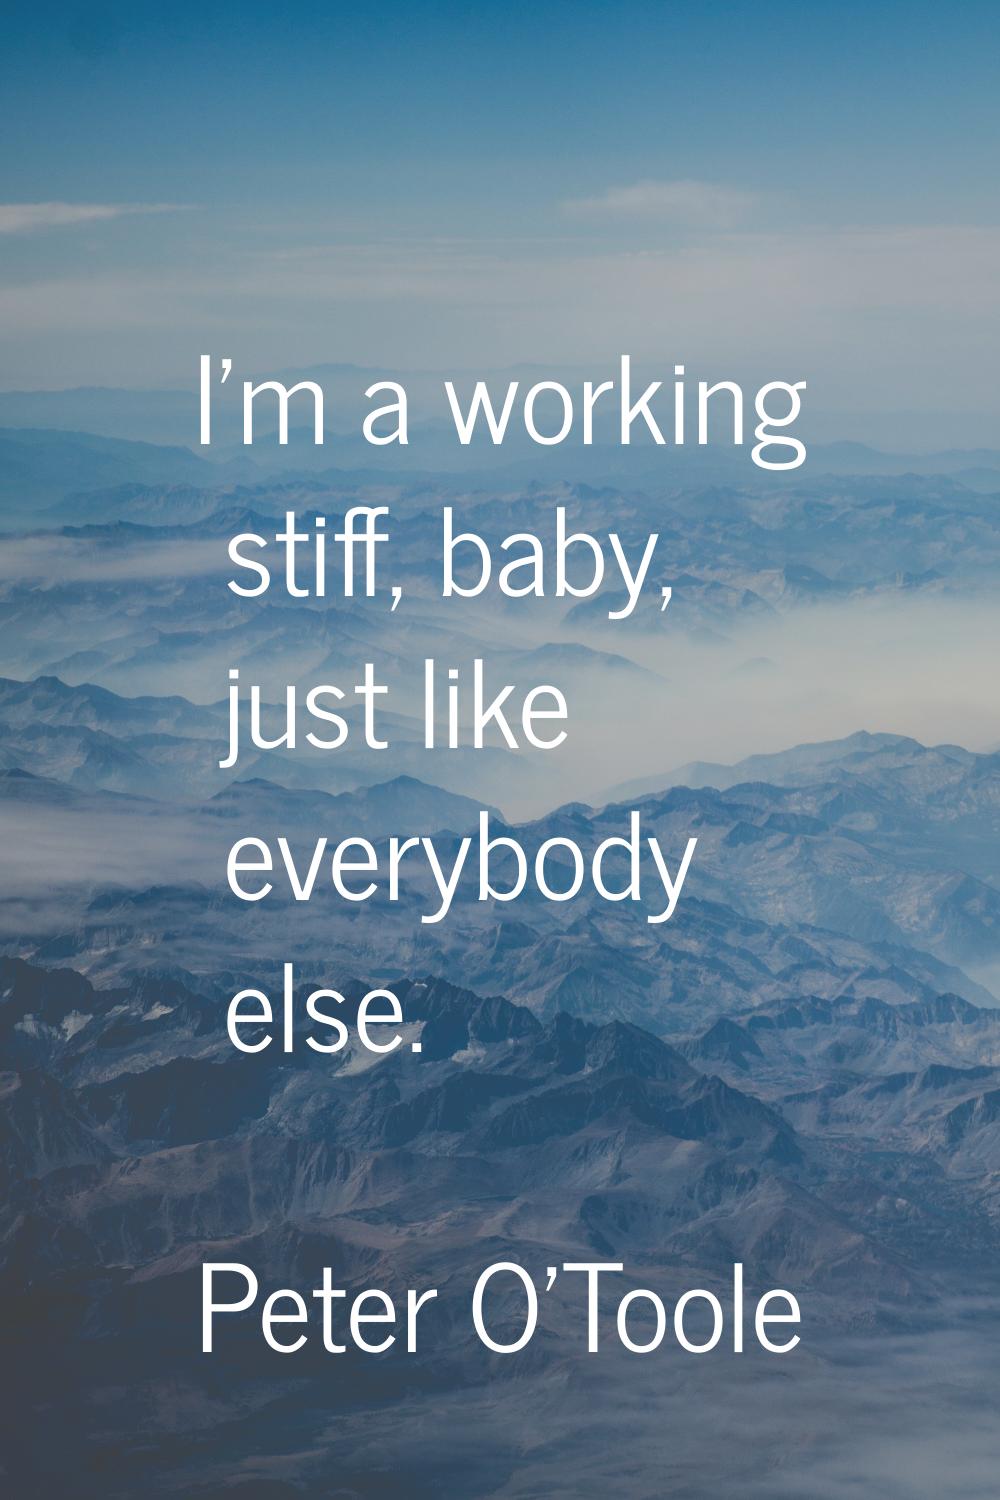 I'm a working stiff, baby, just like everybody else.